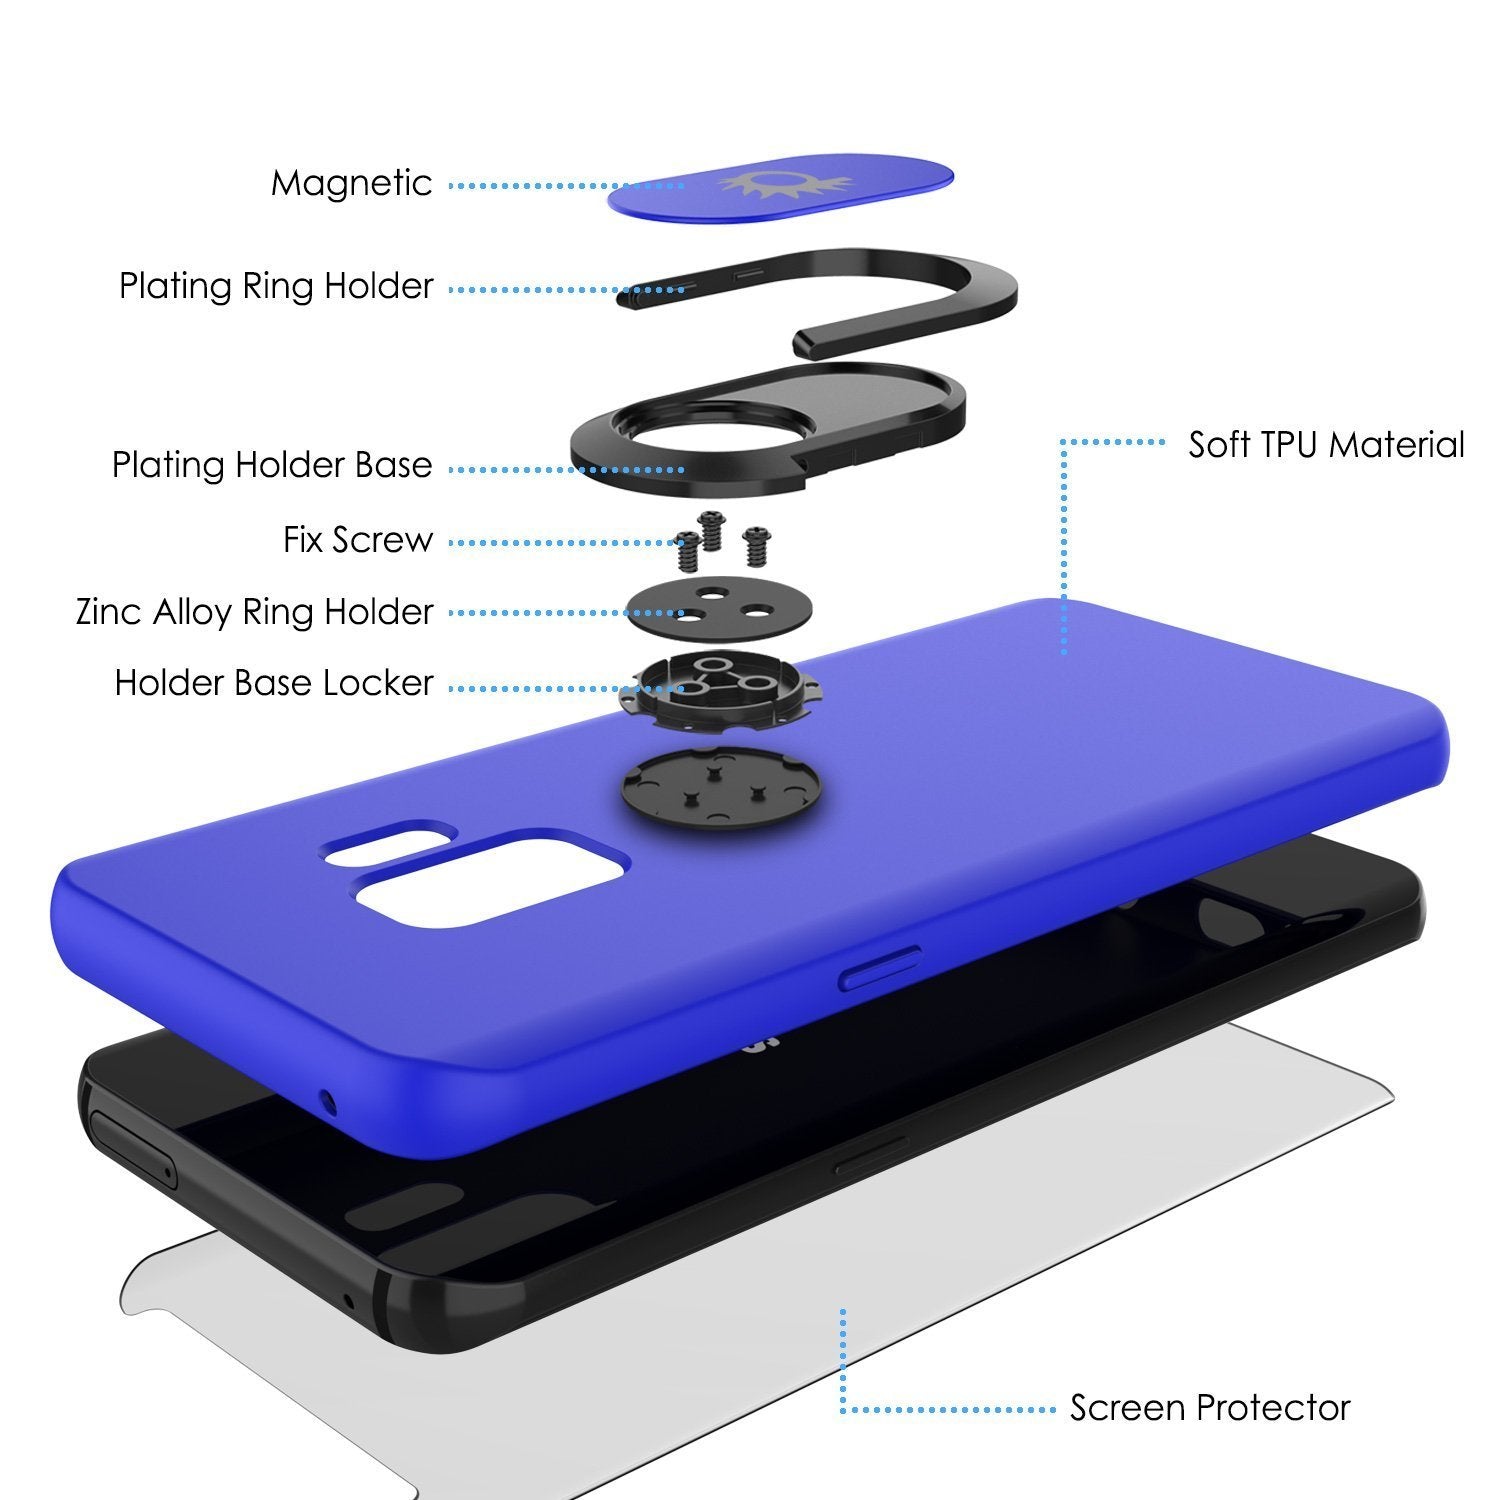 Galaxy S9 Case, Punkcase Magnetix Protective TPU Cover W/ Kickstand, Ring Grip Holder & Metal Plate for Magnetic Car Phone Mount PLUS PunkShield Screen Protector for Samsung S9 Edge [Blue] - PunkCase NZ